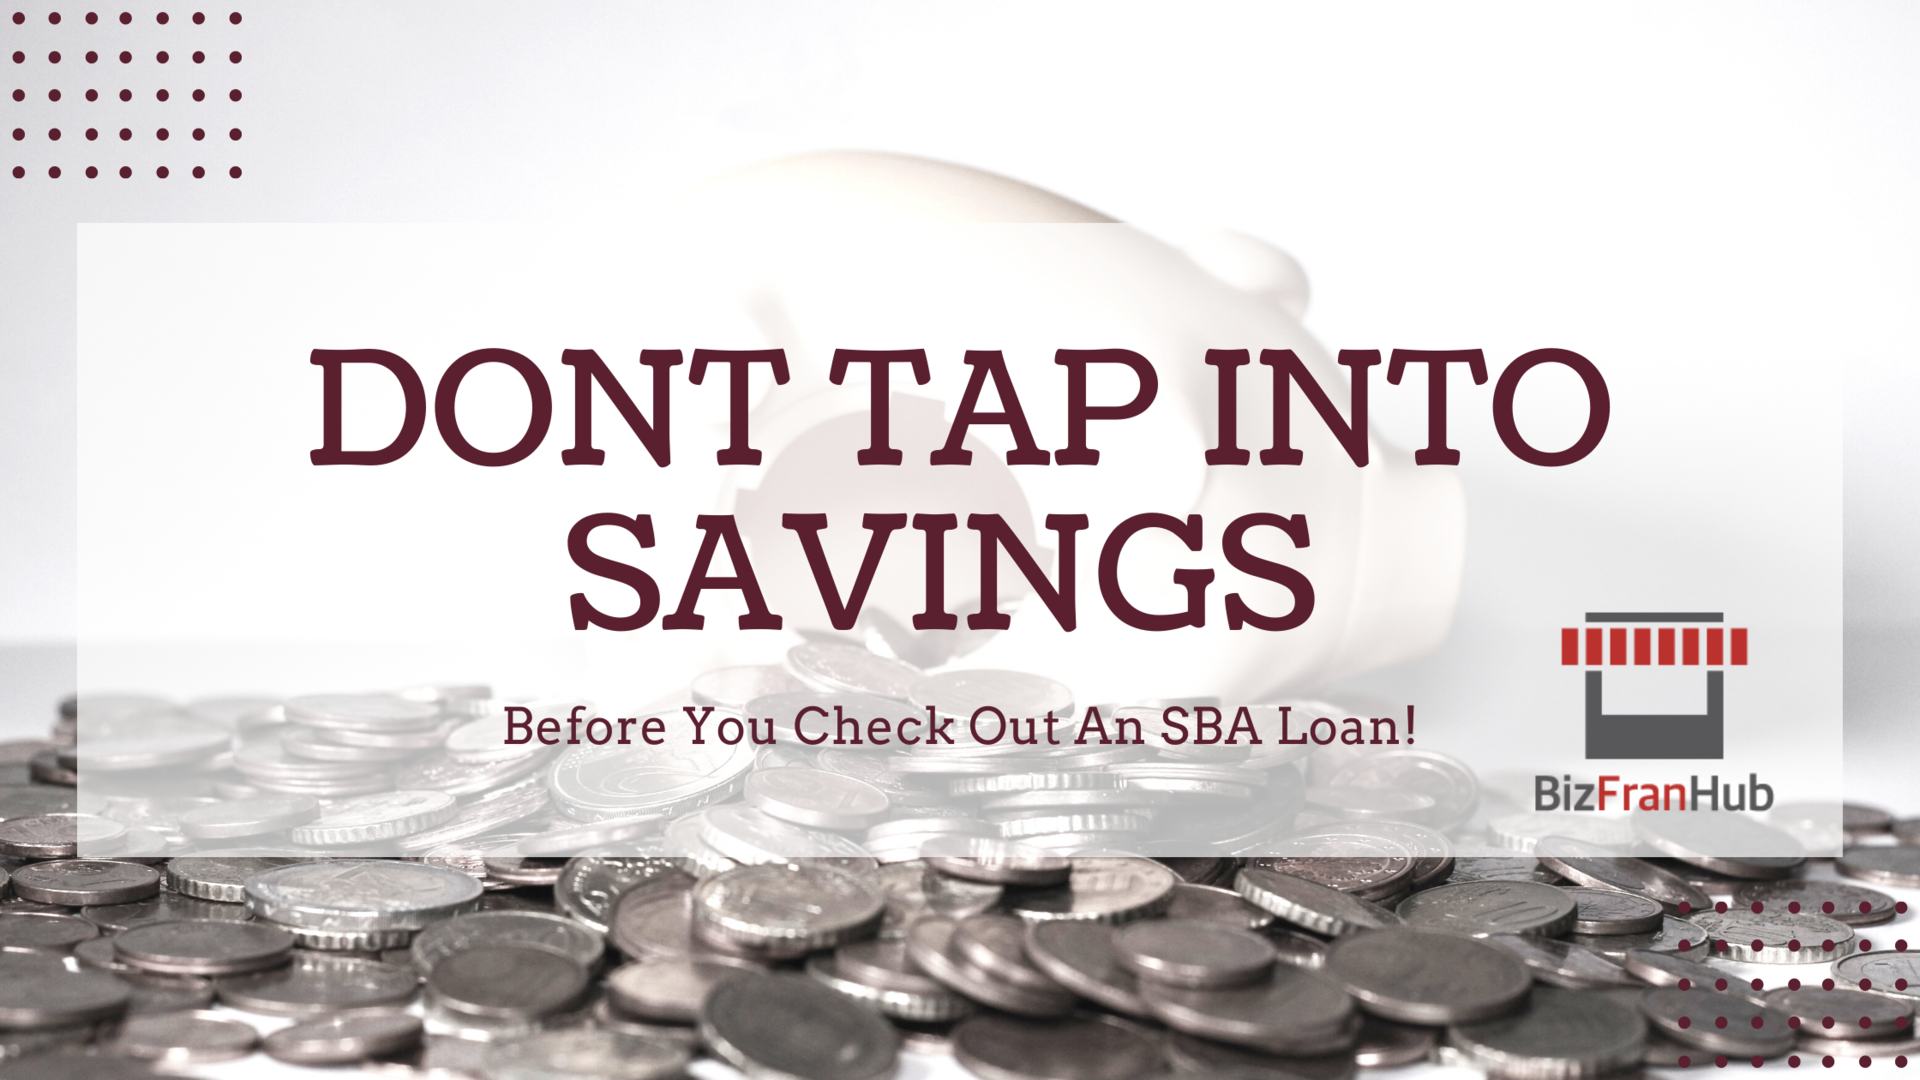 Don’t Tap Into Savings Before You Check Out An SBA Loan!